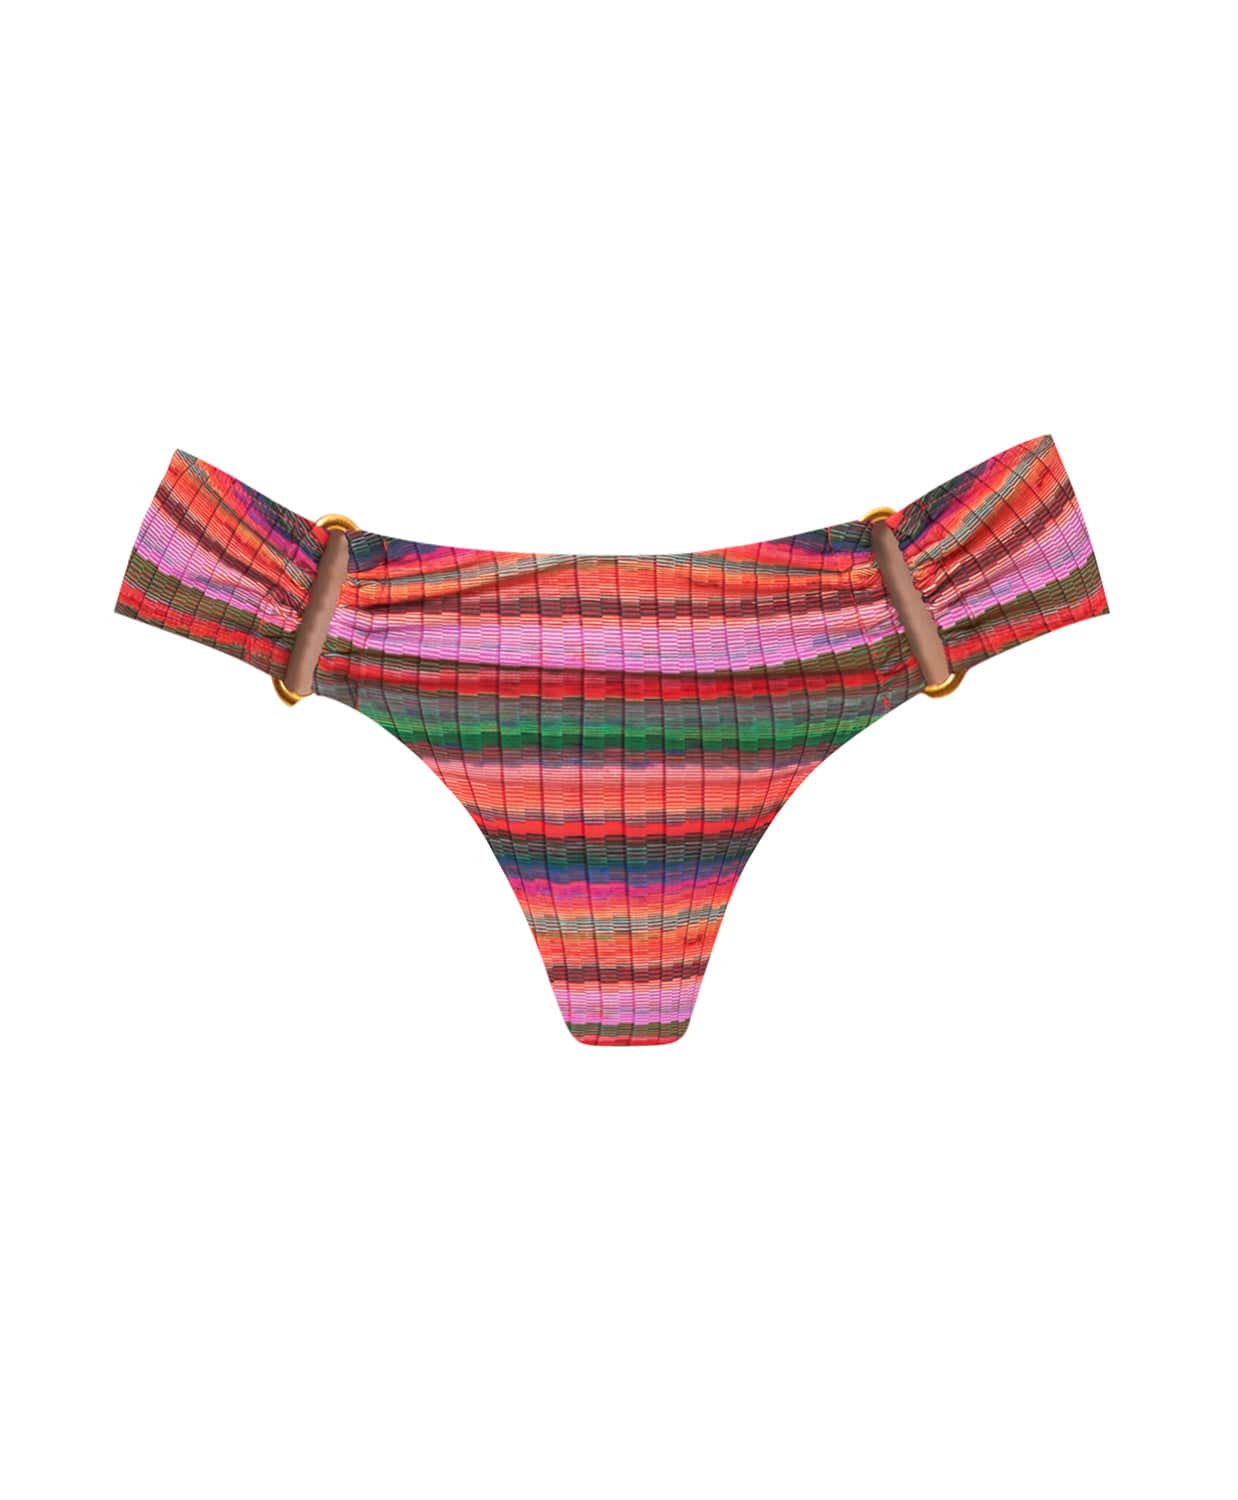 A multi-colored stripe print fanned bikini bottom with gold details. Featured against a white wall background.